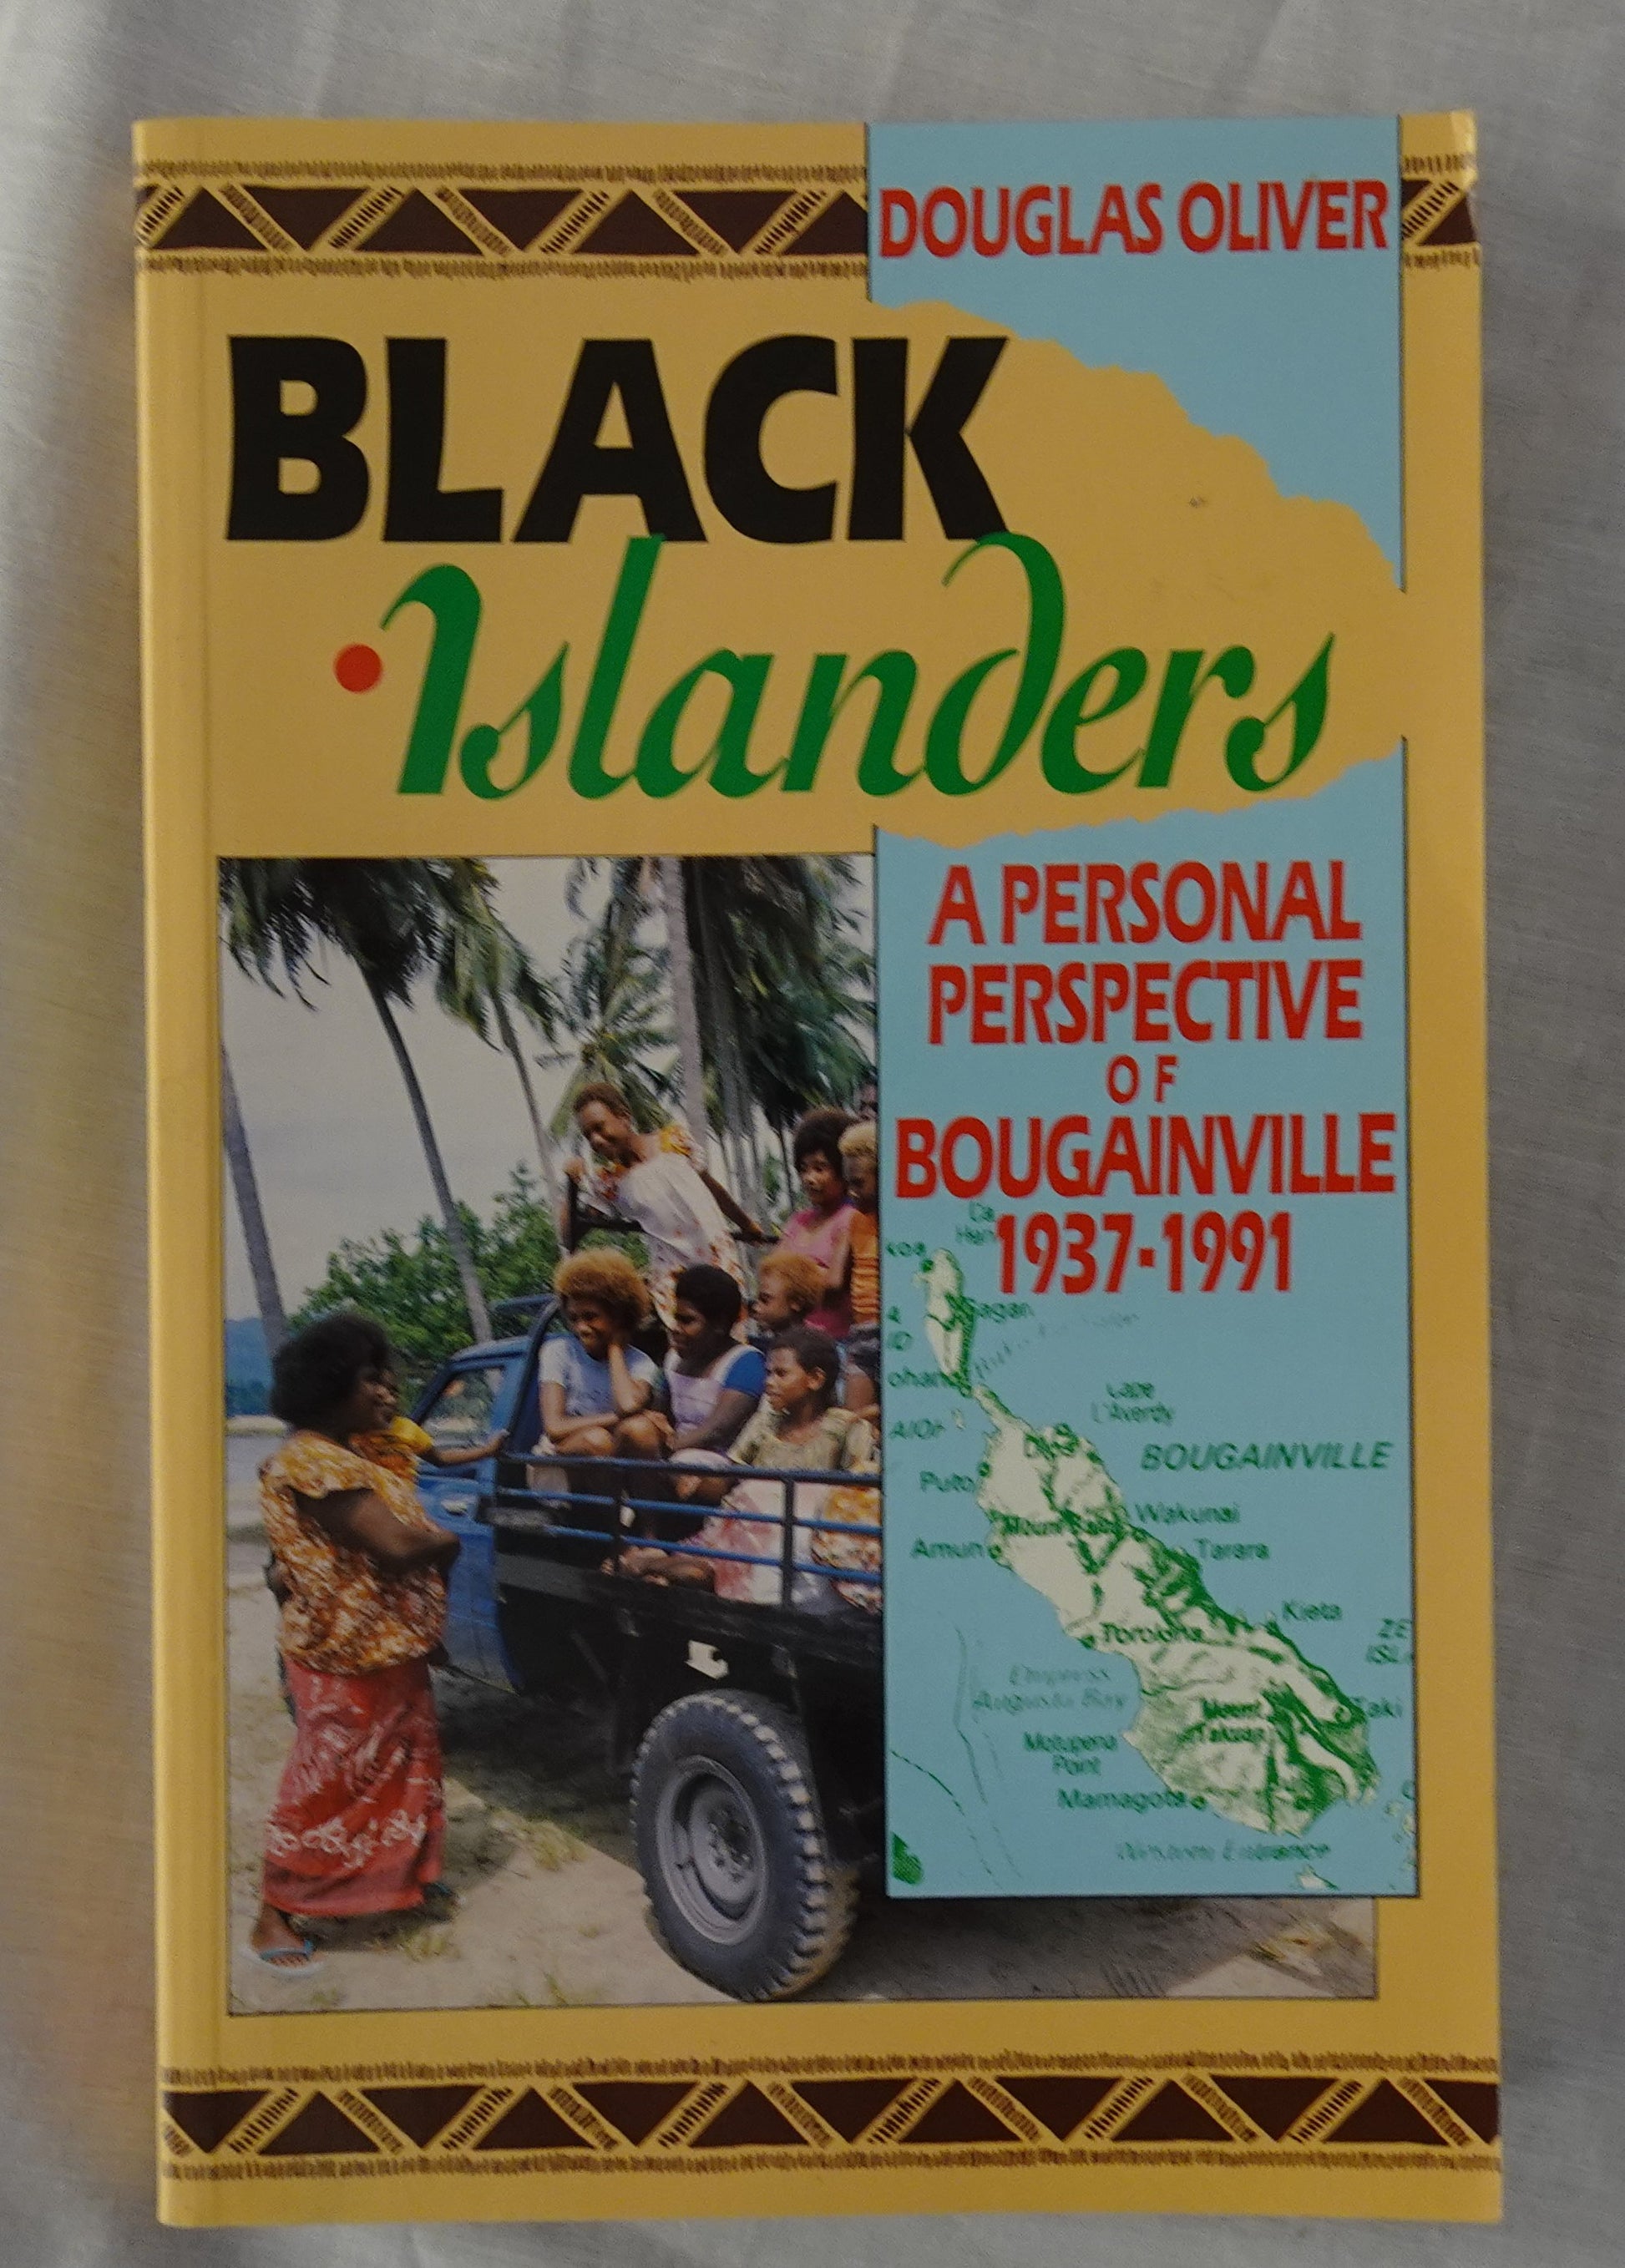 Black Islanders  A Personal Perspective of Bougainville 1937-1991  by Douglas Oliver